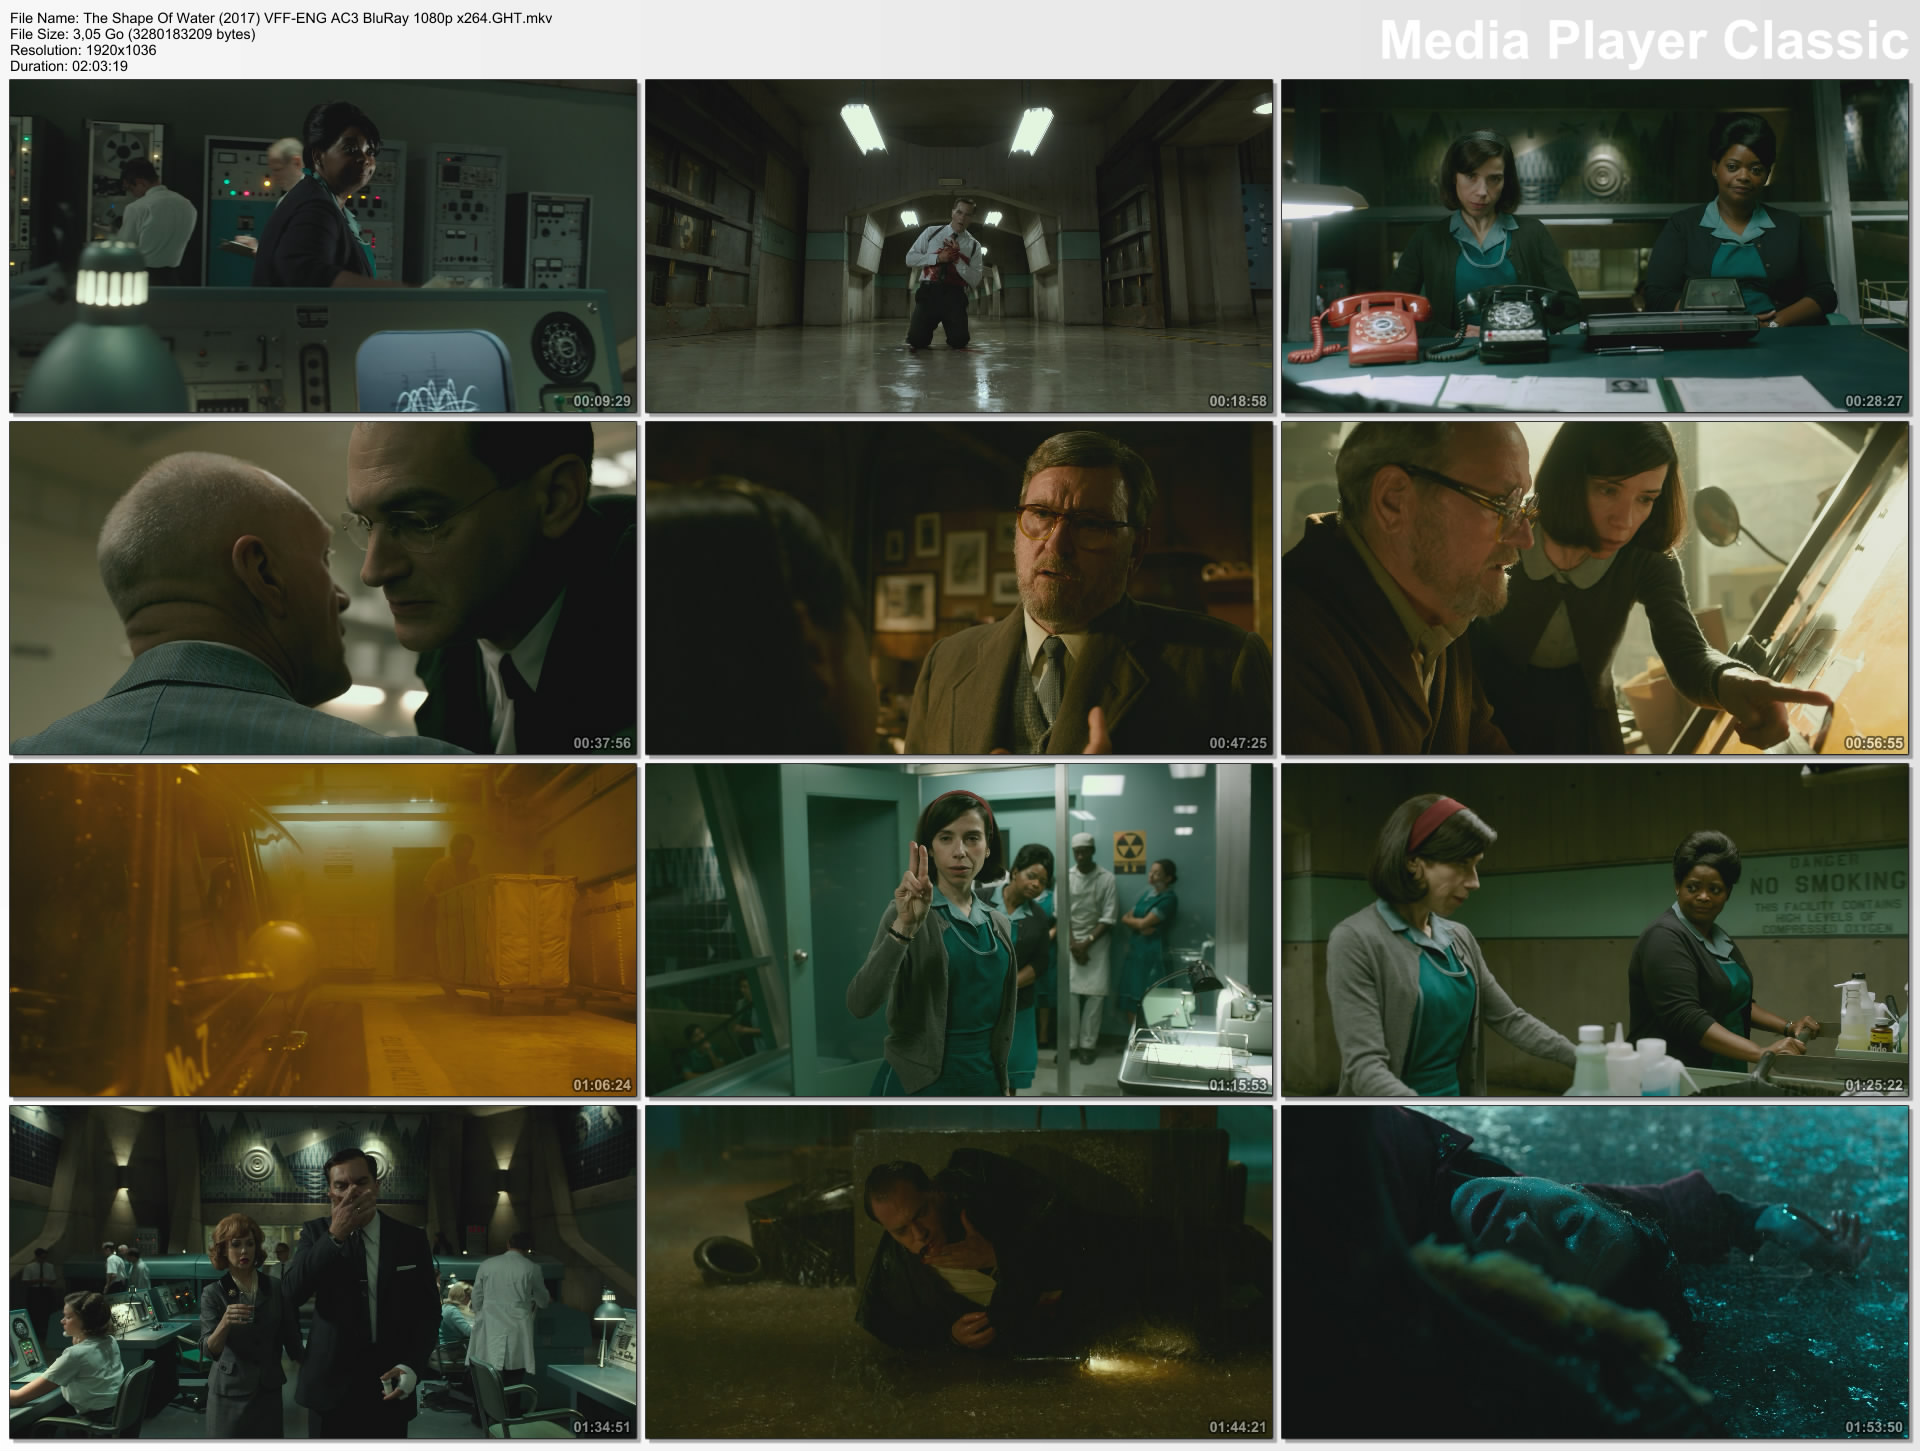 The Shape Of Water (2017) VFF-ENG AC3 BluRay 1080p x264.GHT